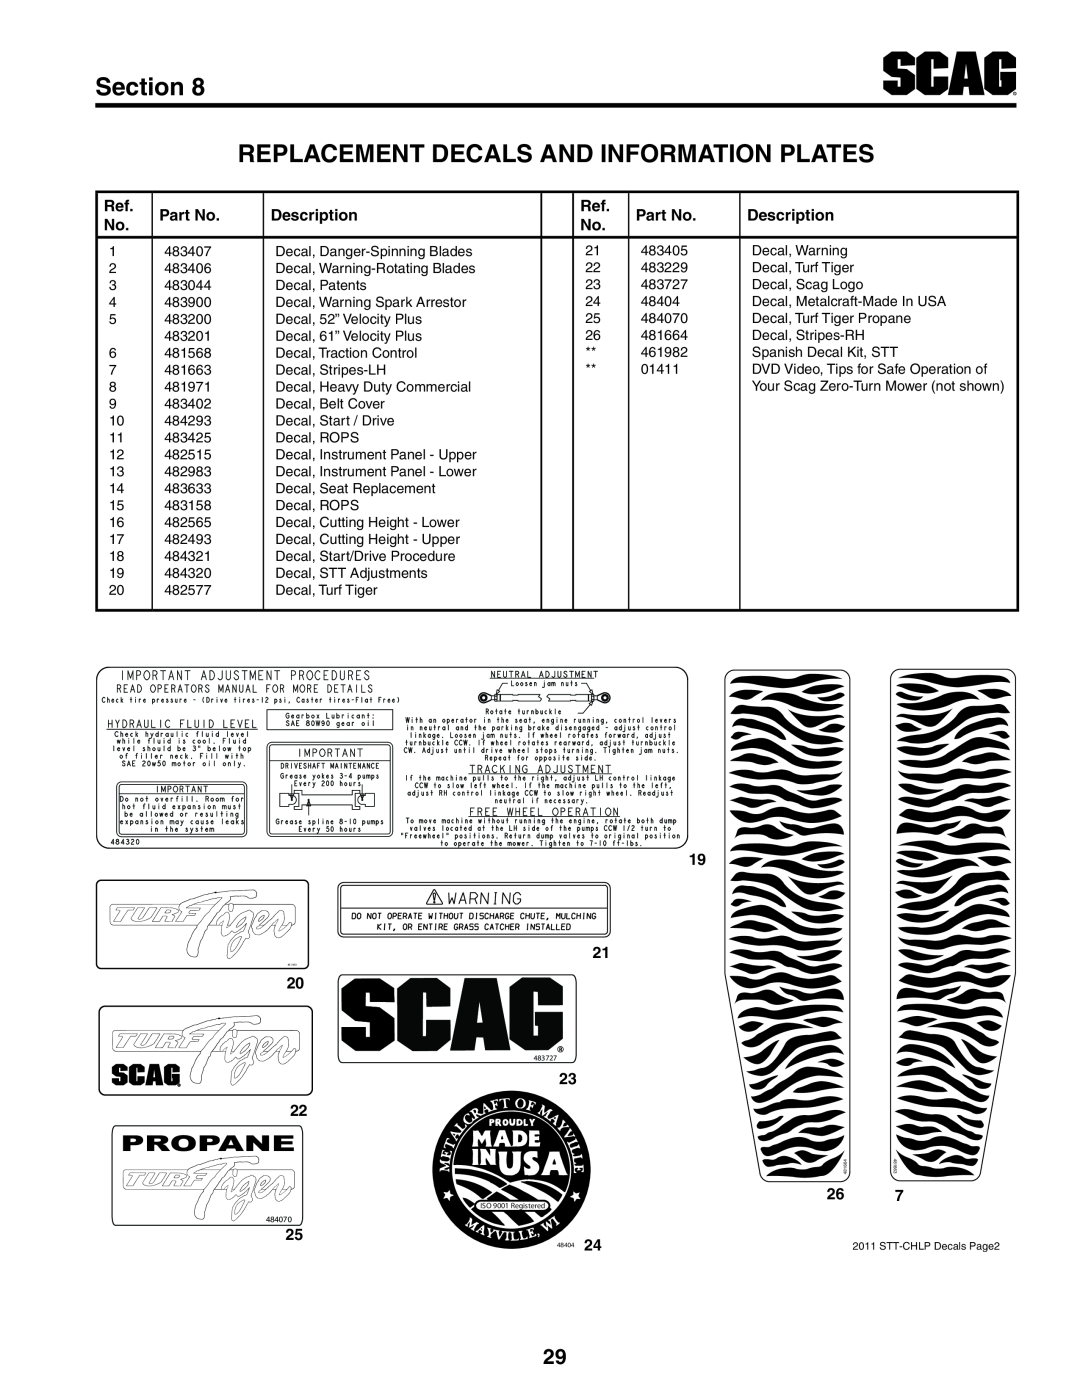 Scag Power Equipment STT-25CH-LP manual Section REPLACEMENT DECALS AND INFORMATION PLATES, Propane 